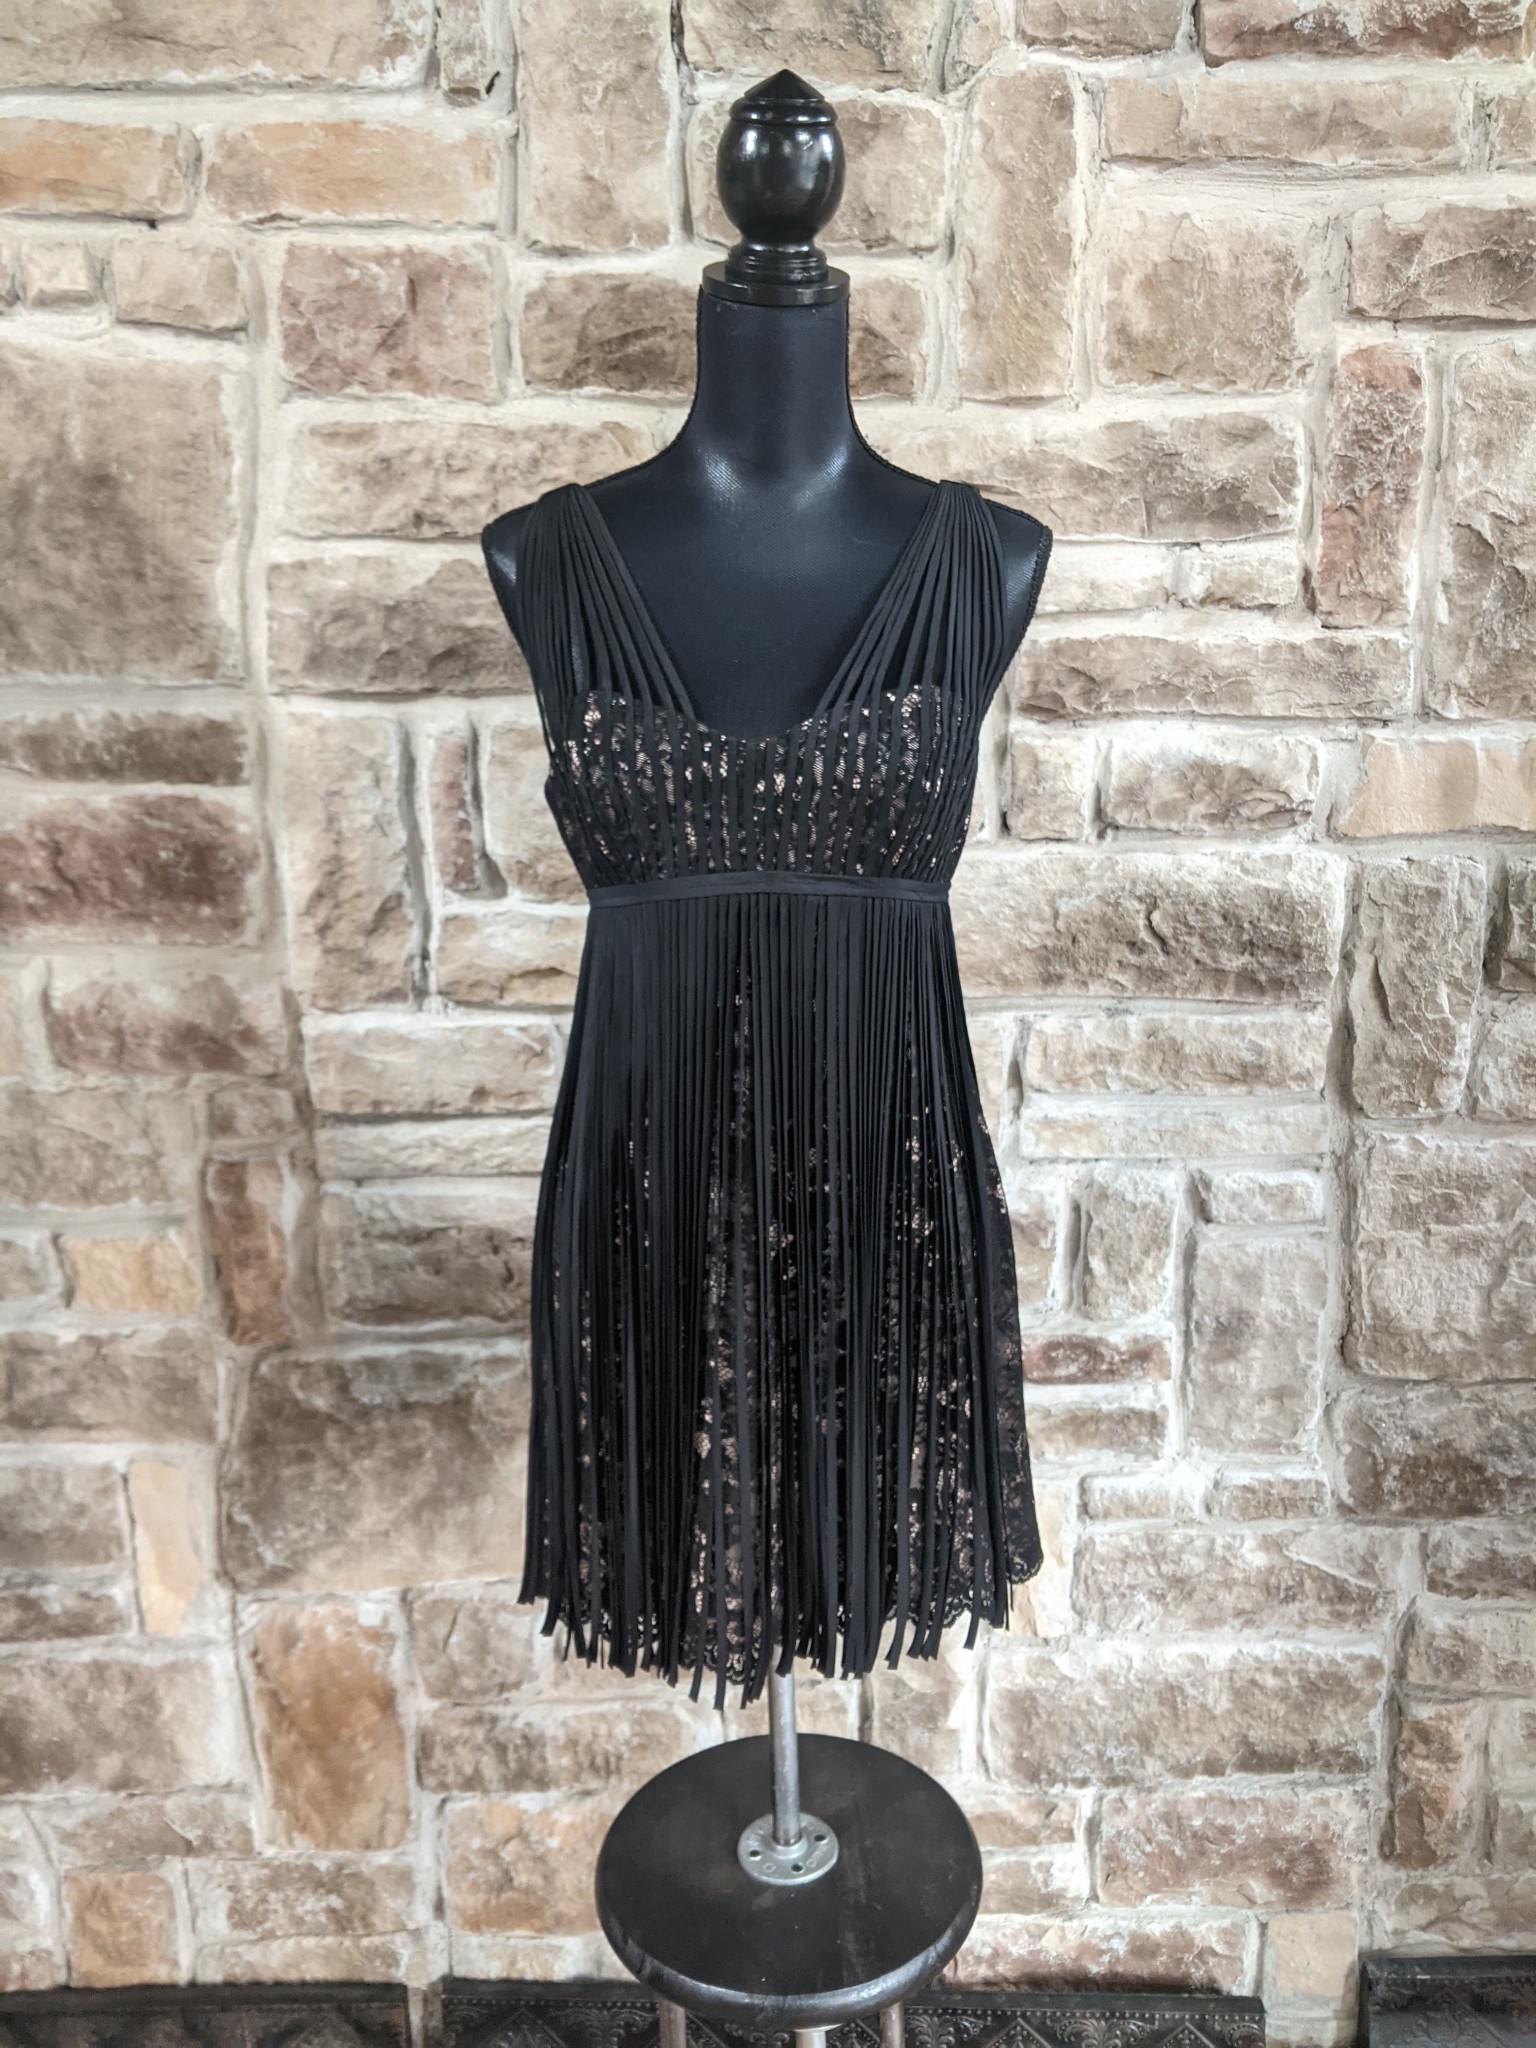 Black Lace Dress with Nude Underlay and Fringe, Size 8P